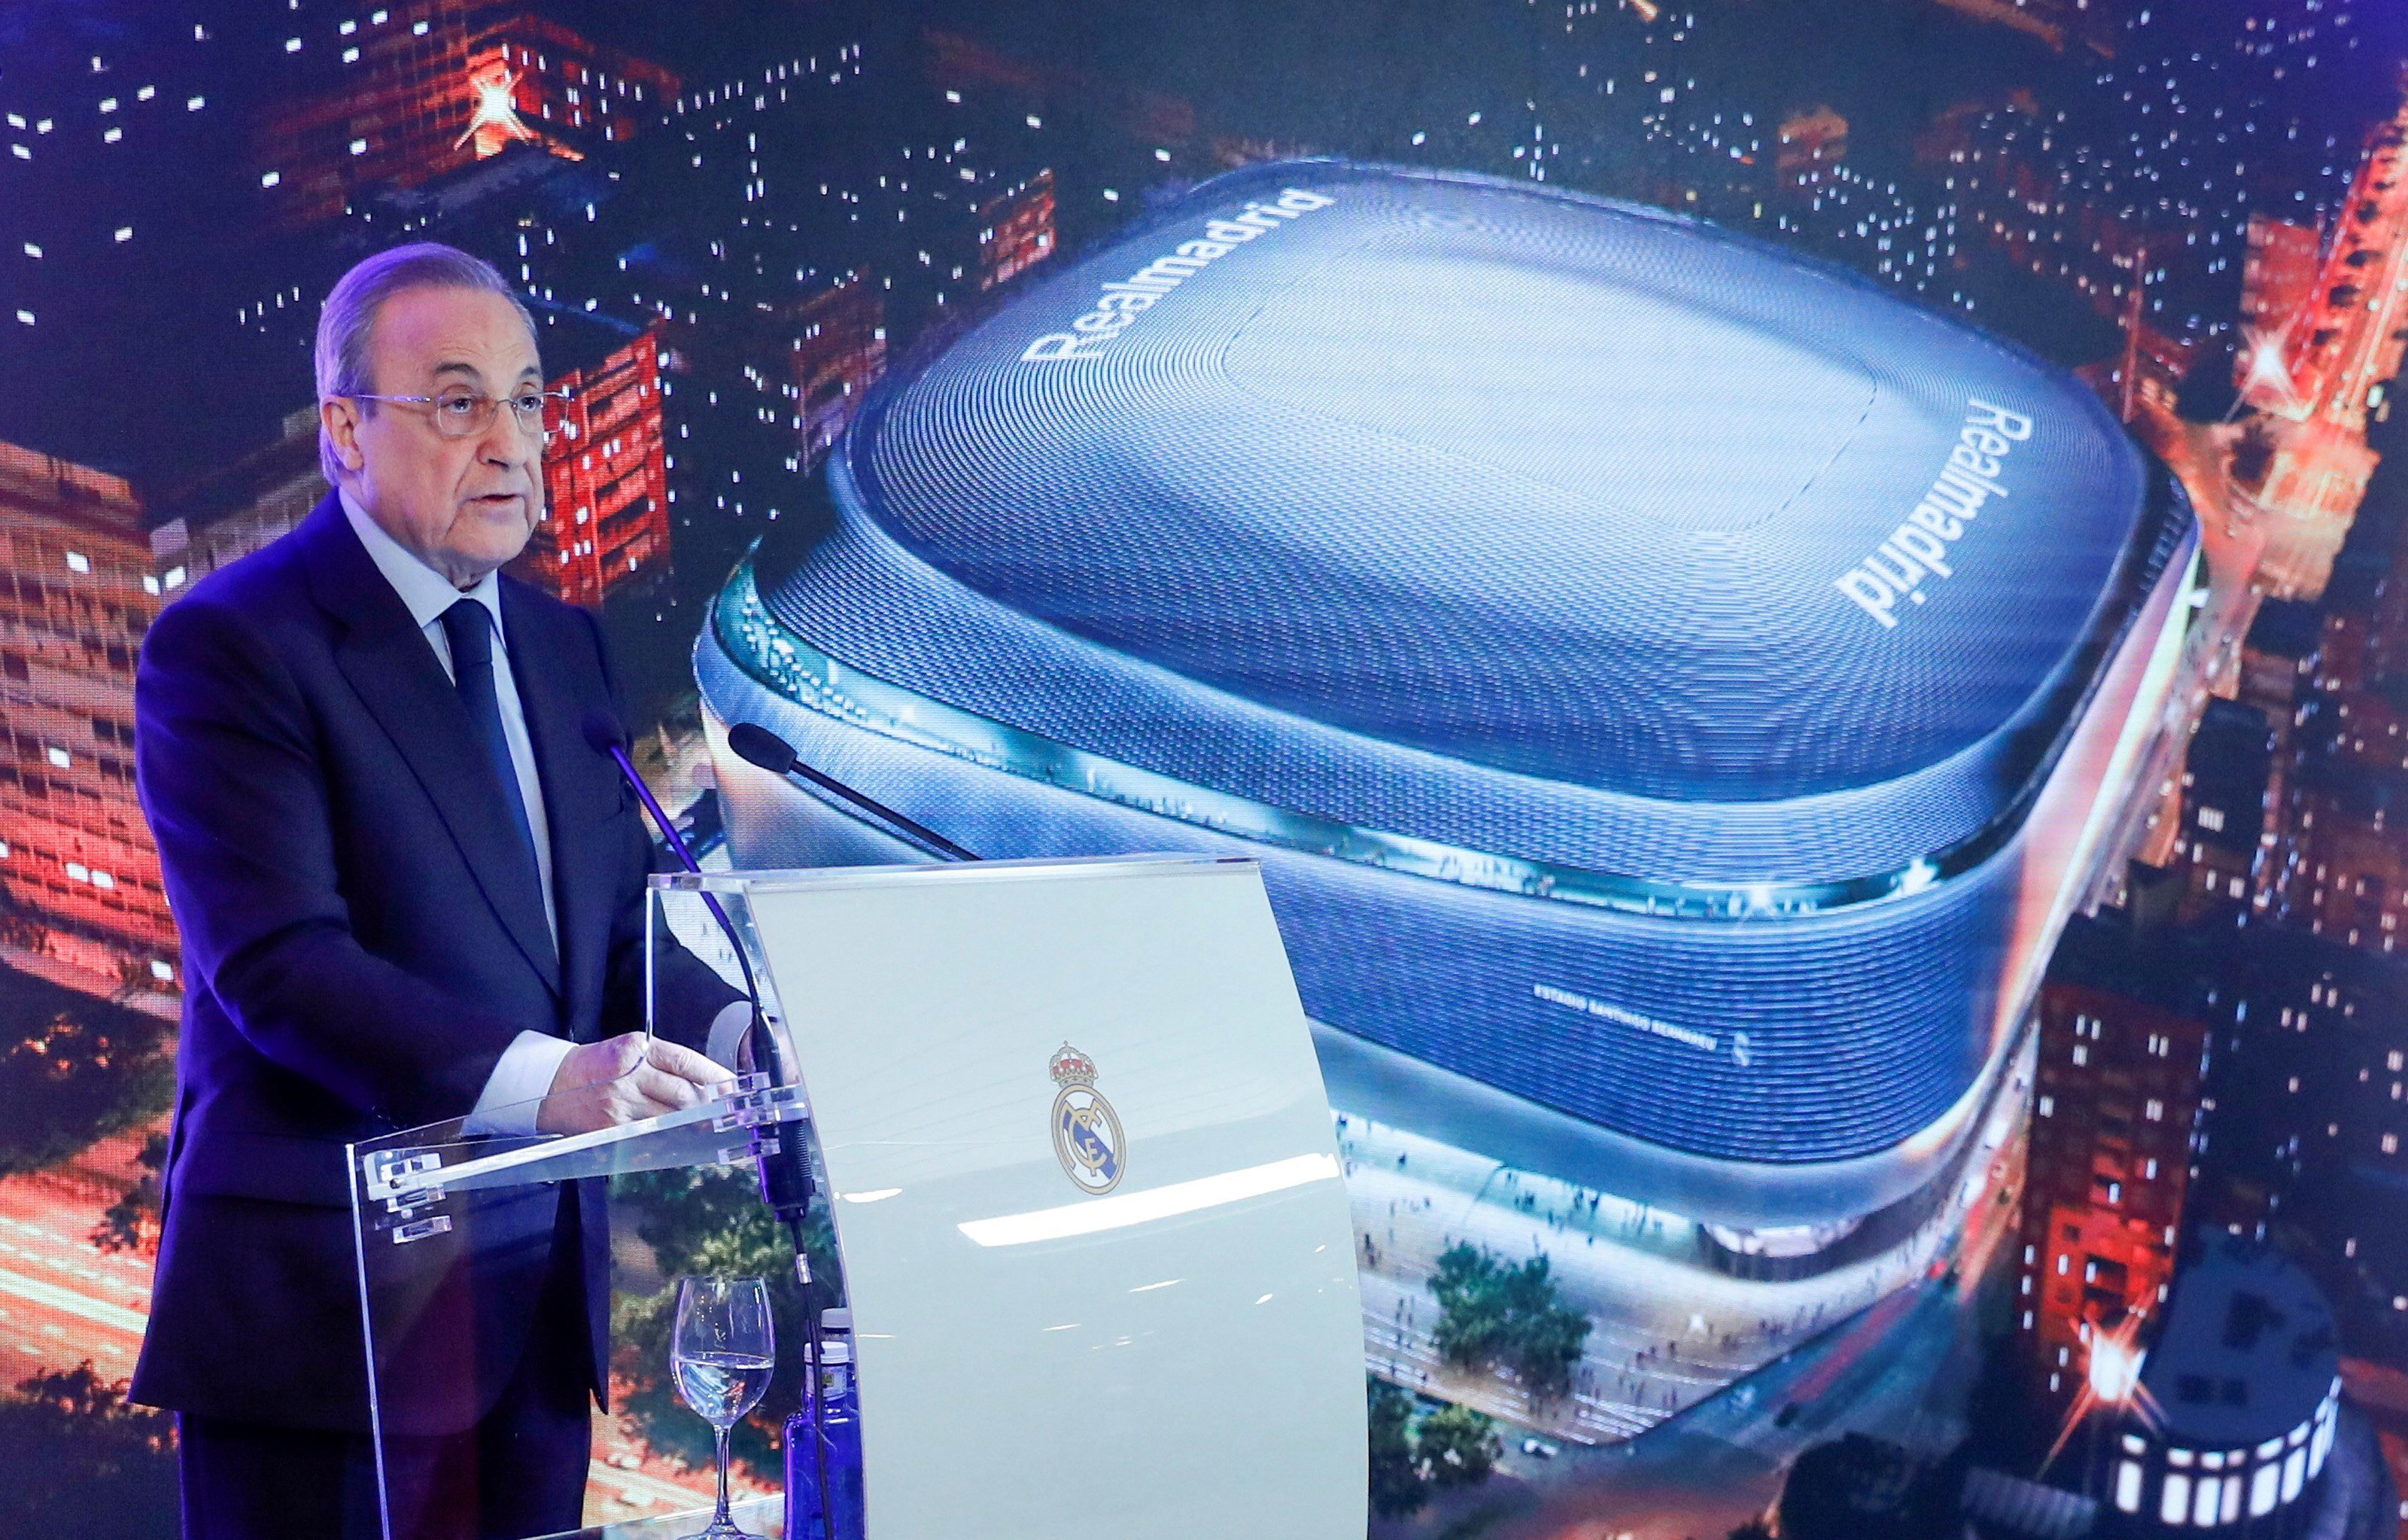 Real Madrid president Florentino Perez would be the chairman of the proposed European Super League. Photo: EPA